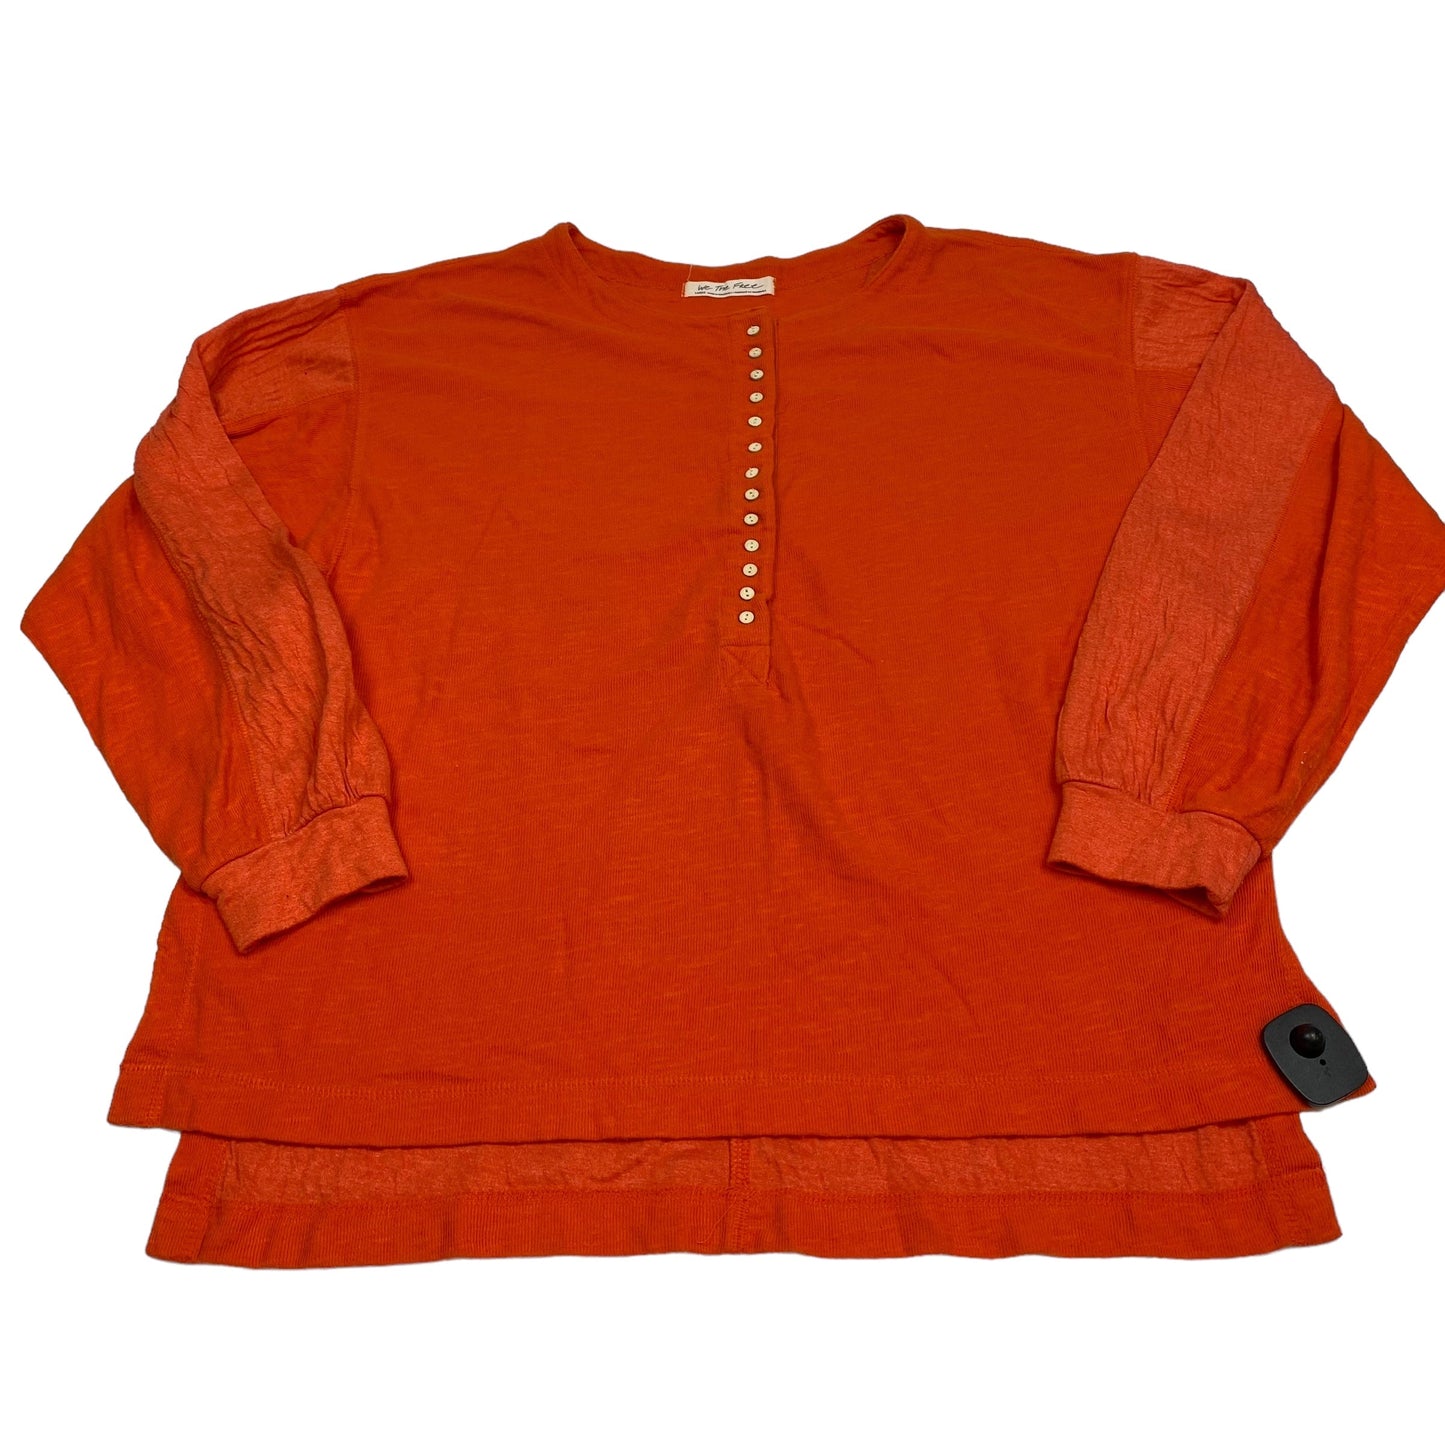 Orange Top Long Sleeve We The Free, Size L